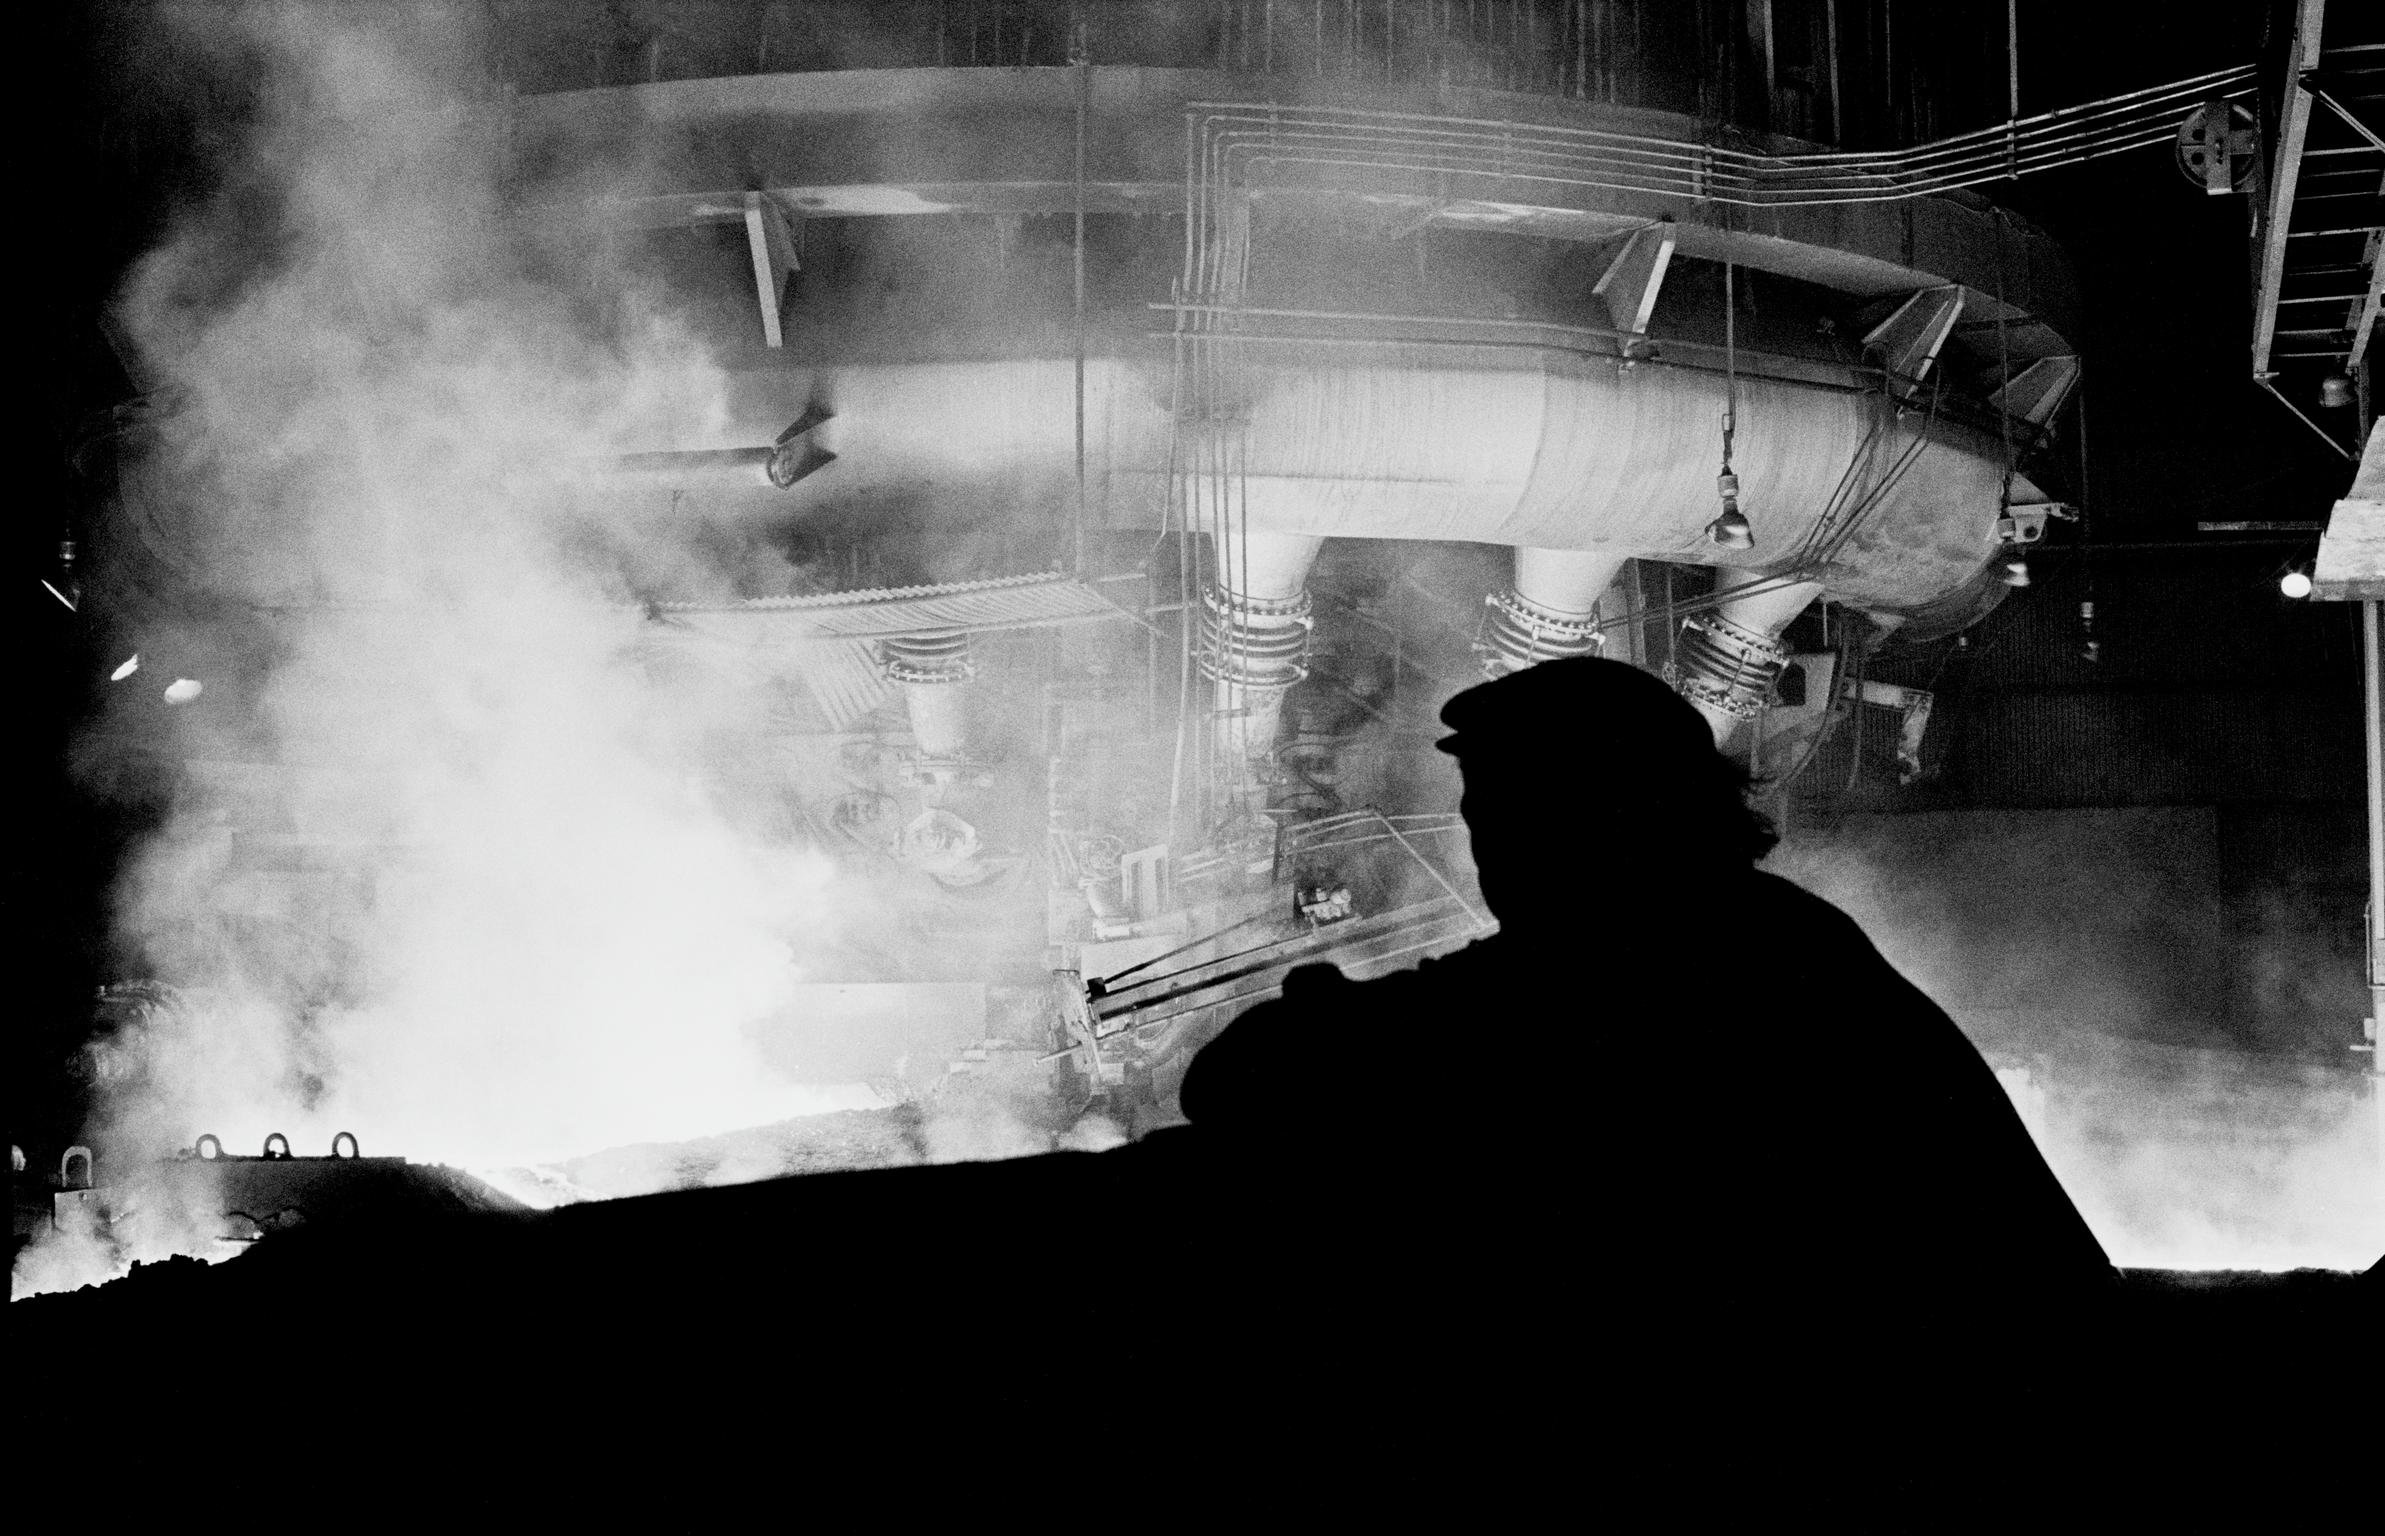 Working in Shotton Steel Works during its last few days before closing. Shotton, Wales